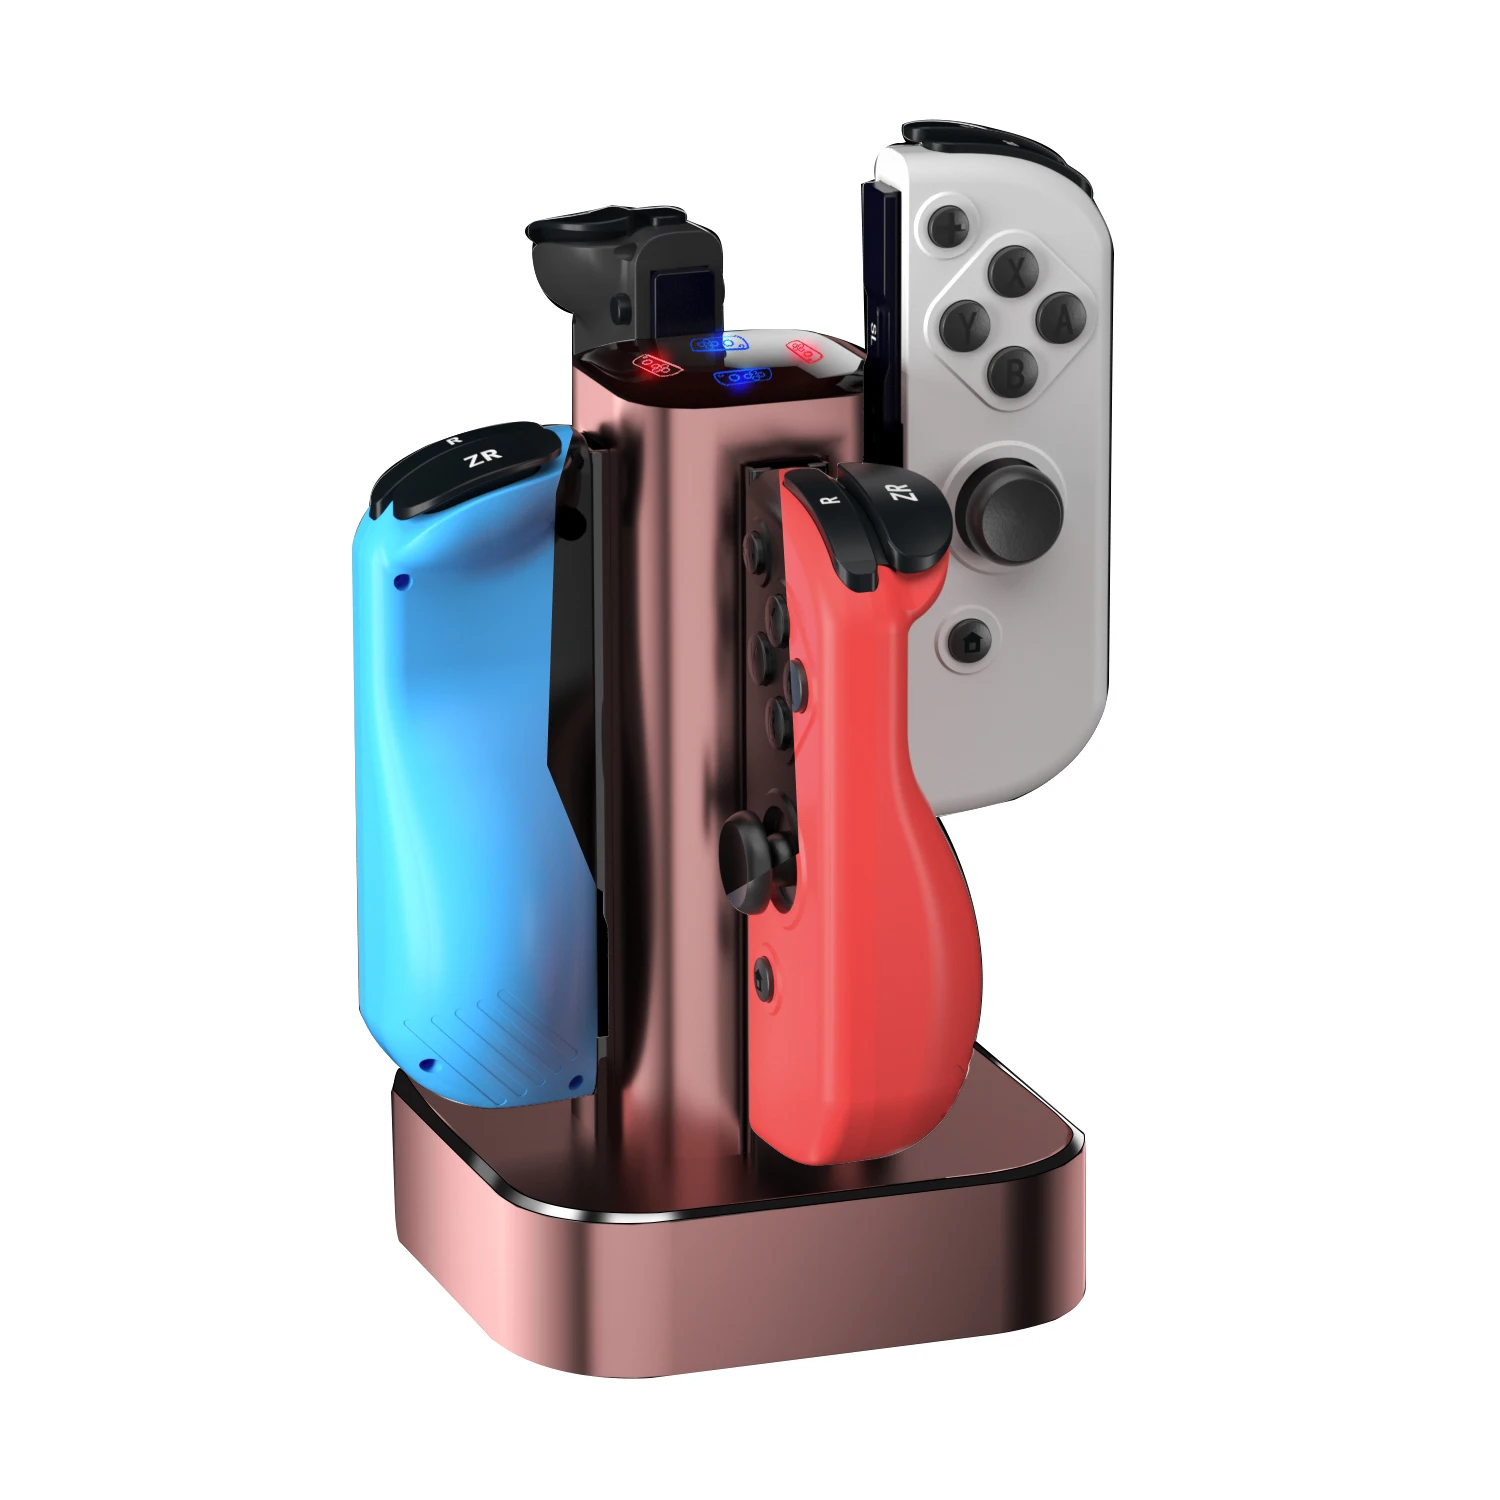 

MIMD Joy Con Charging Dock for Nintendo Switch - Joycon Docking Station Charges Up to 4 Joy-Con Controllers Simultaneously